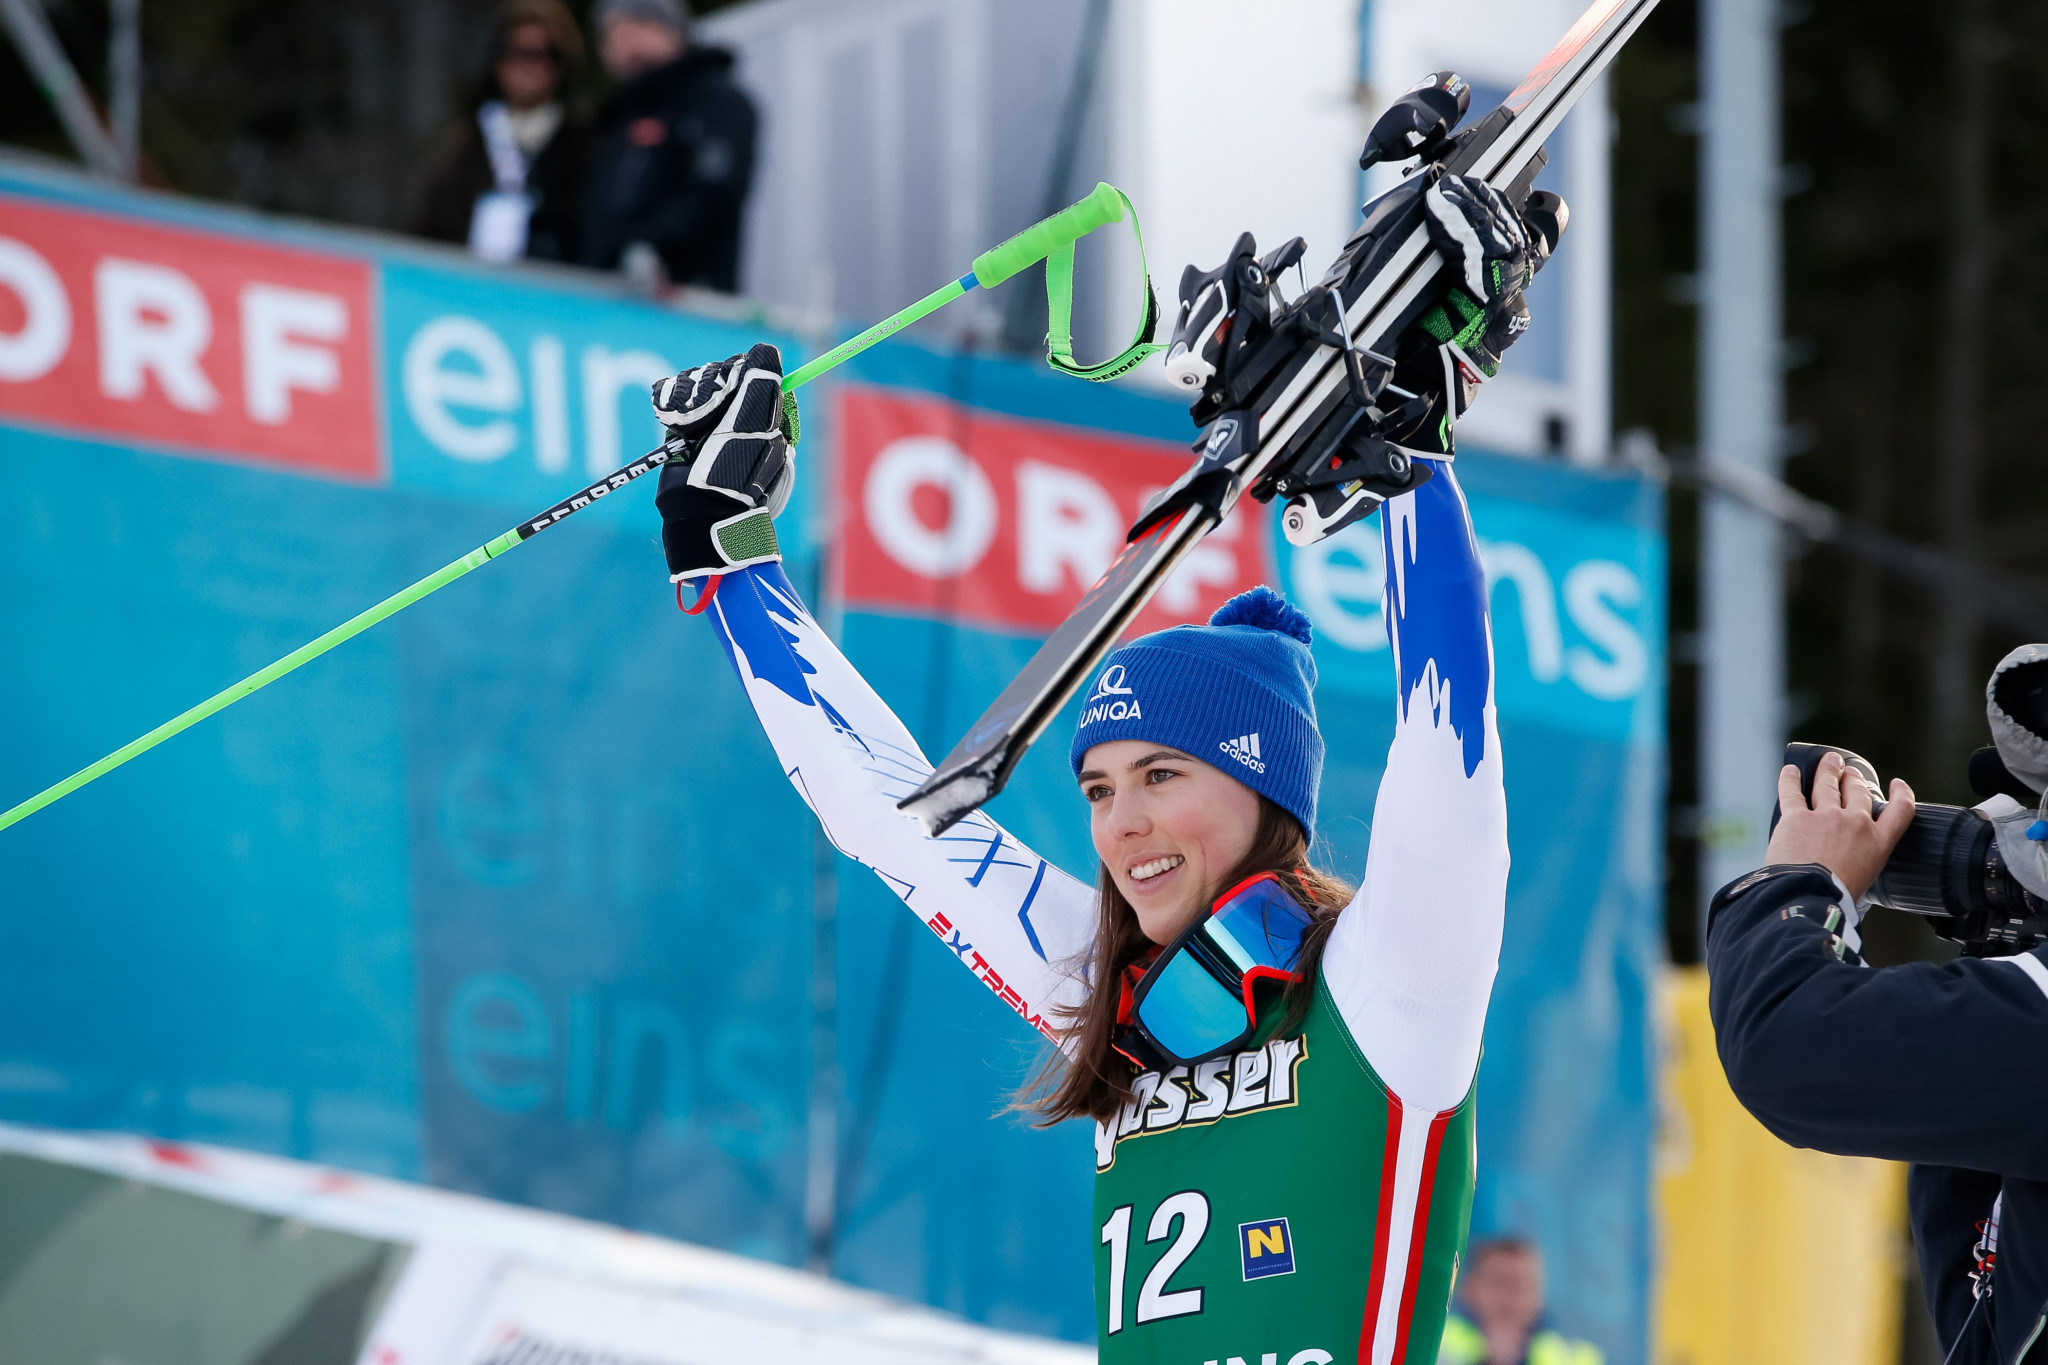 Vlhova secures first giant slalom victory of career at FIS Alpine Skiing World Cup in Semmering 